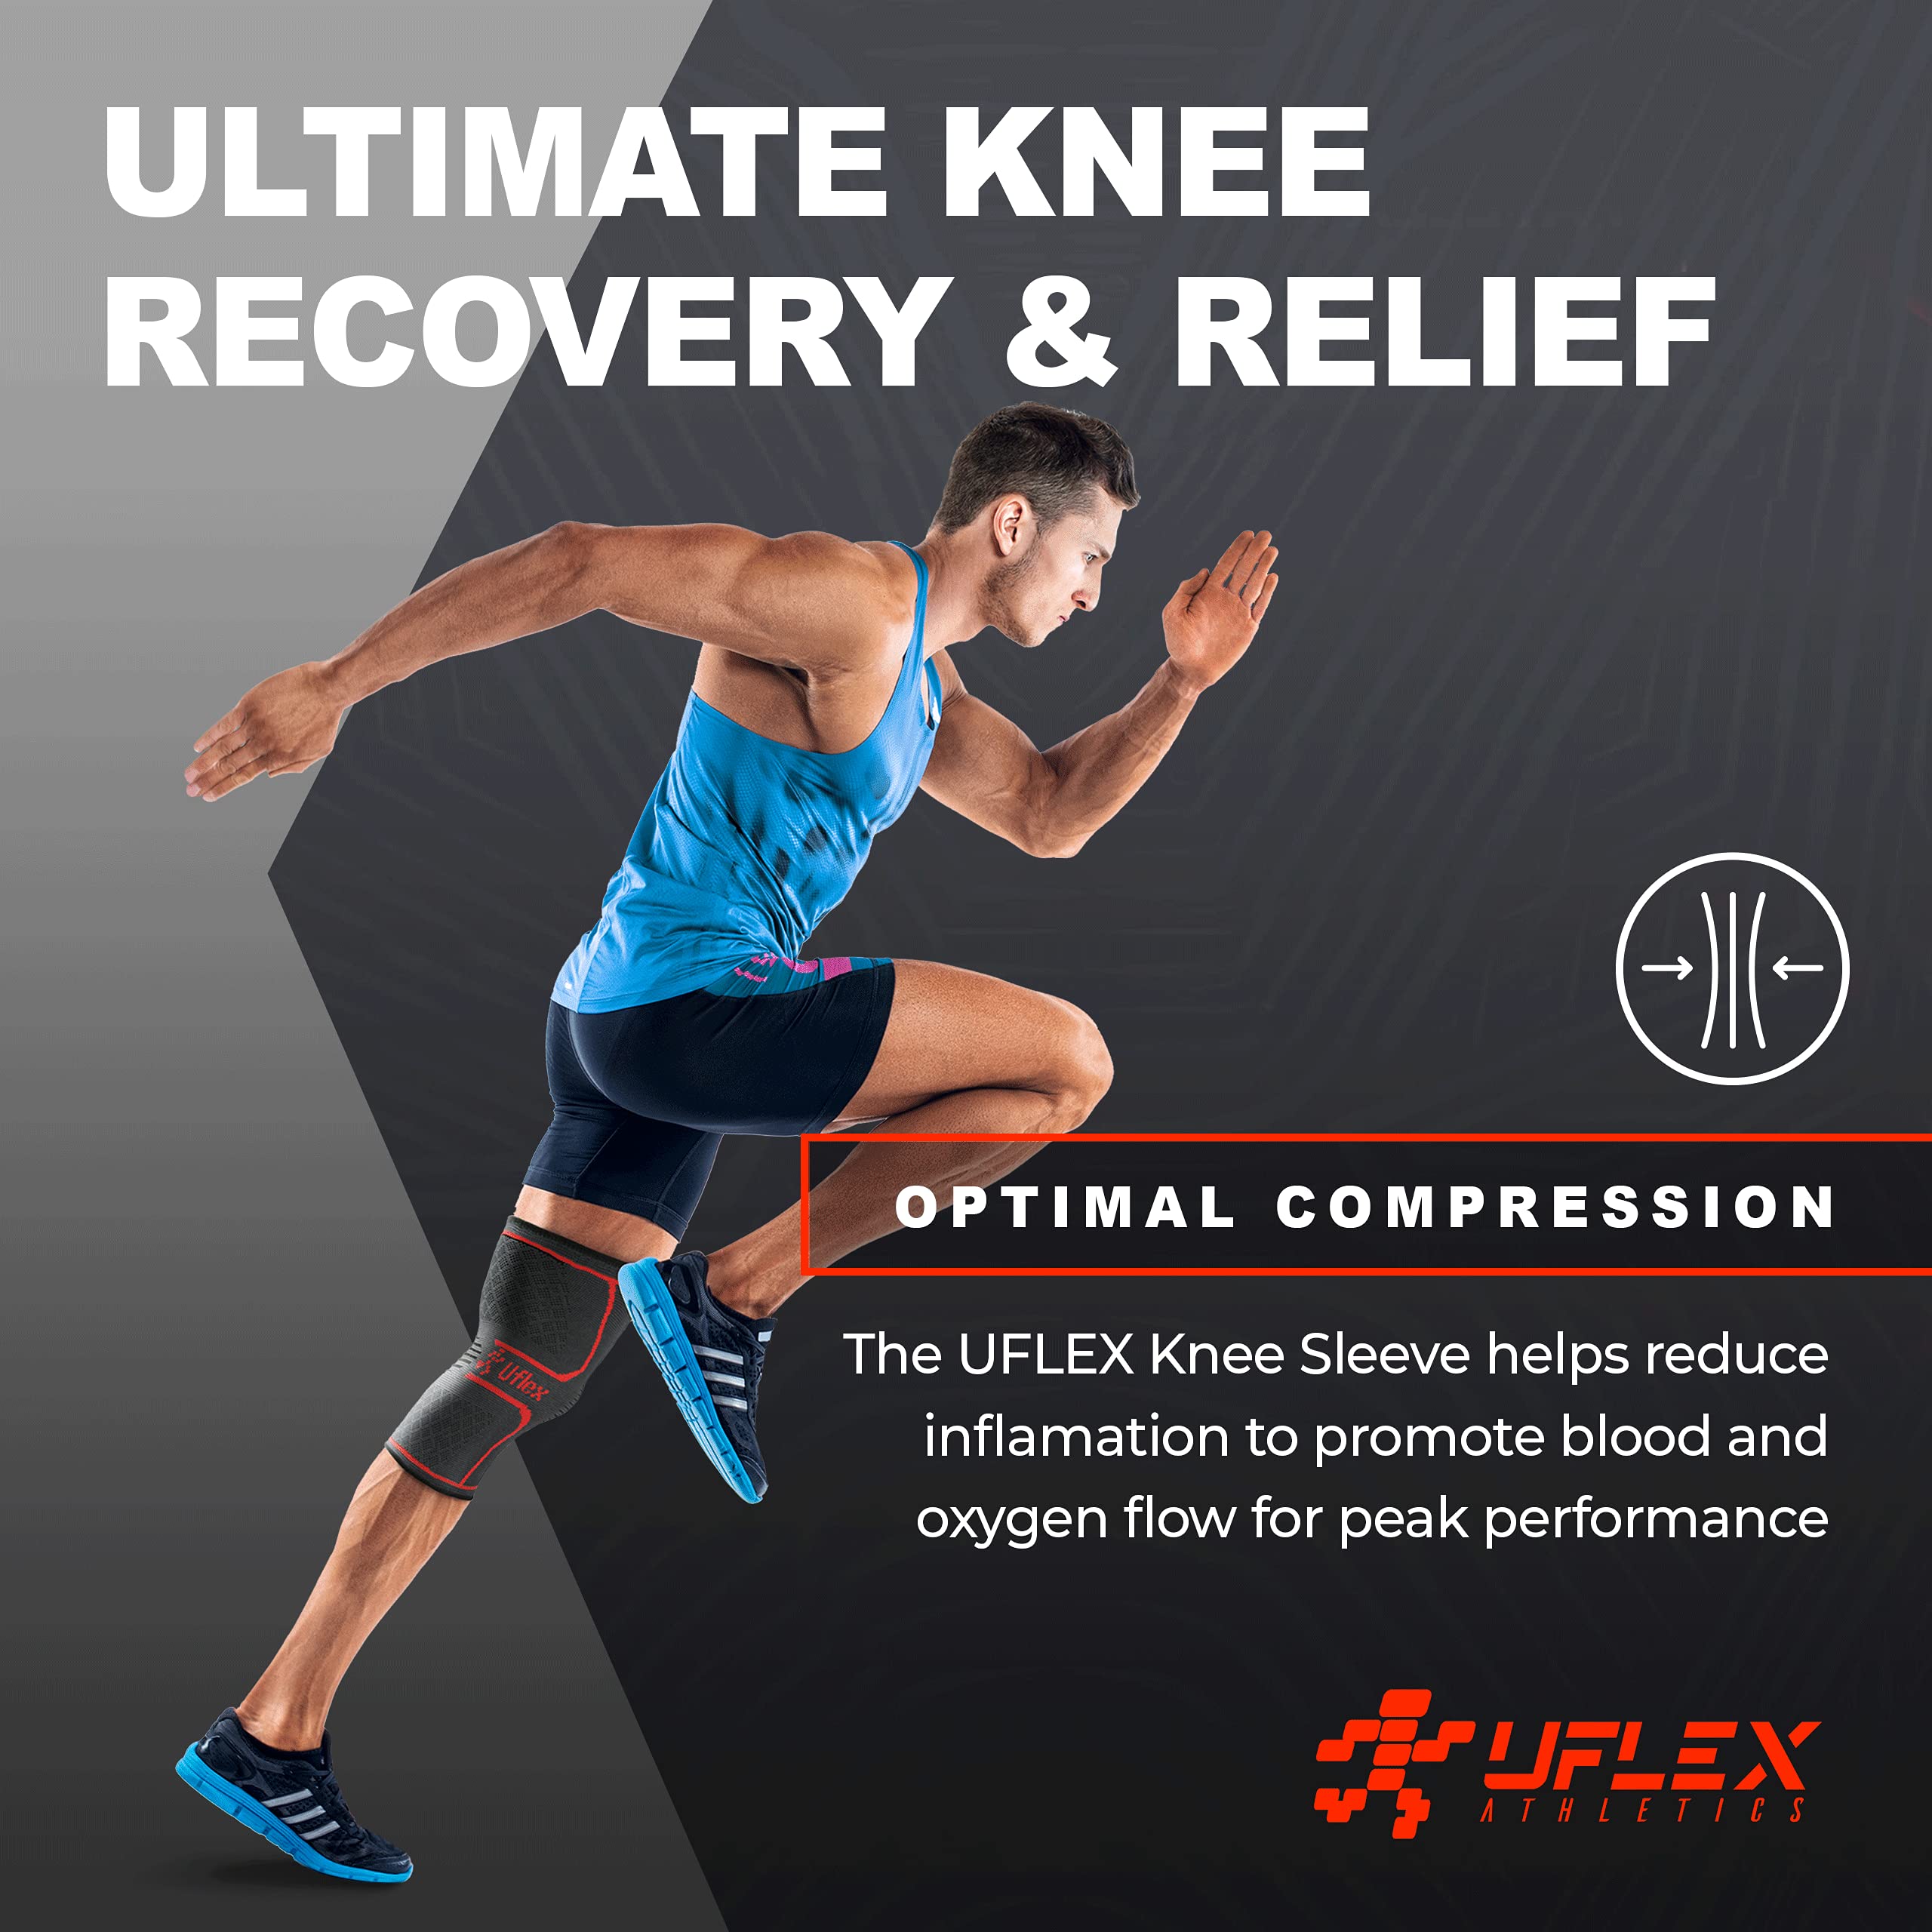 UFlex Athletics Knee Compression Sleeve Support for Women and Men - Knee Brace for Pain Relief, Fitness, Weightlifting, Hiking, Sports